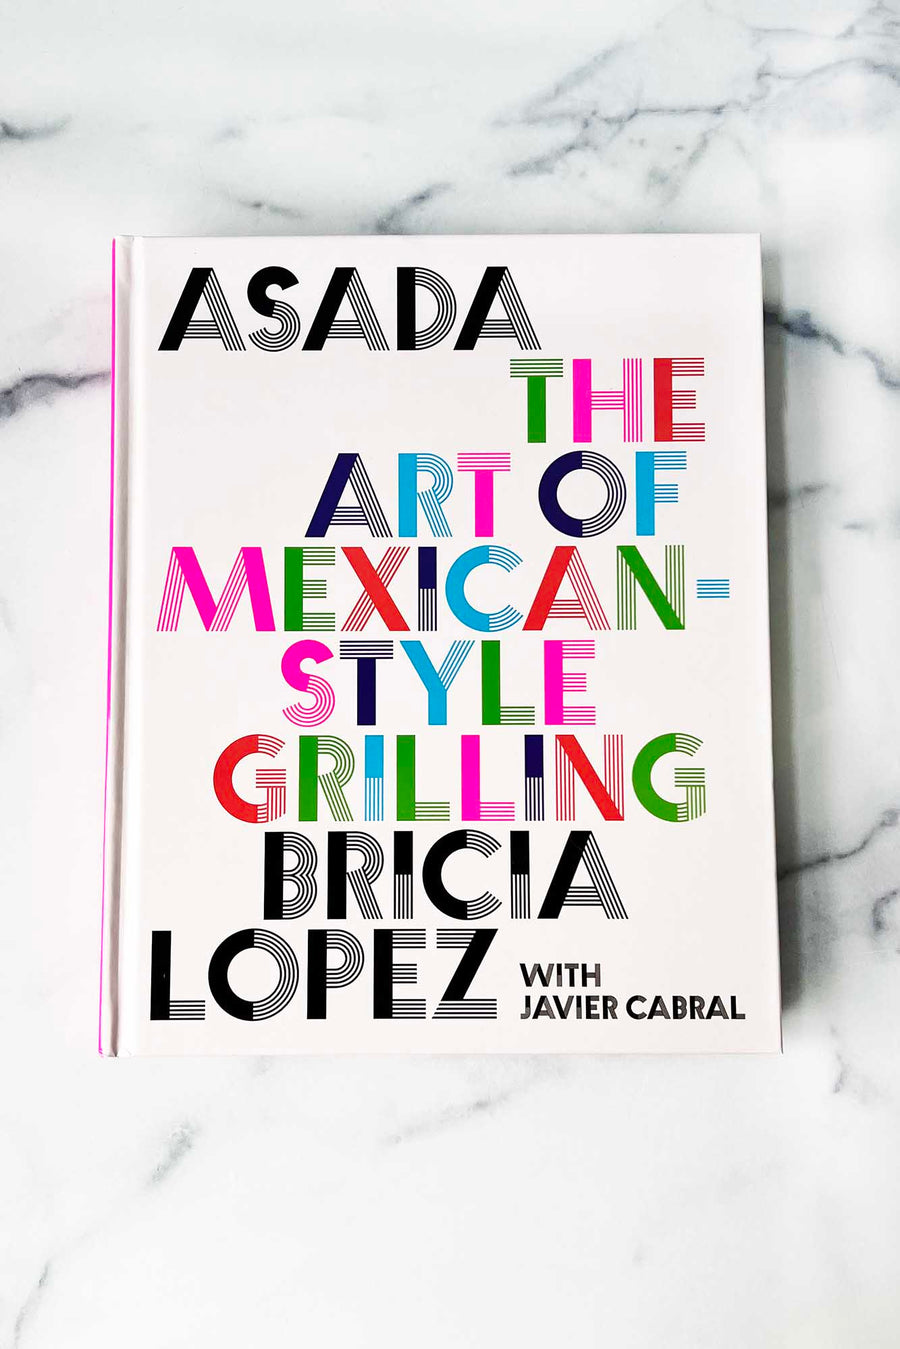 Asada: The Art of Mexican-Style Grilling